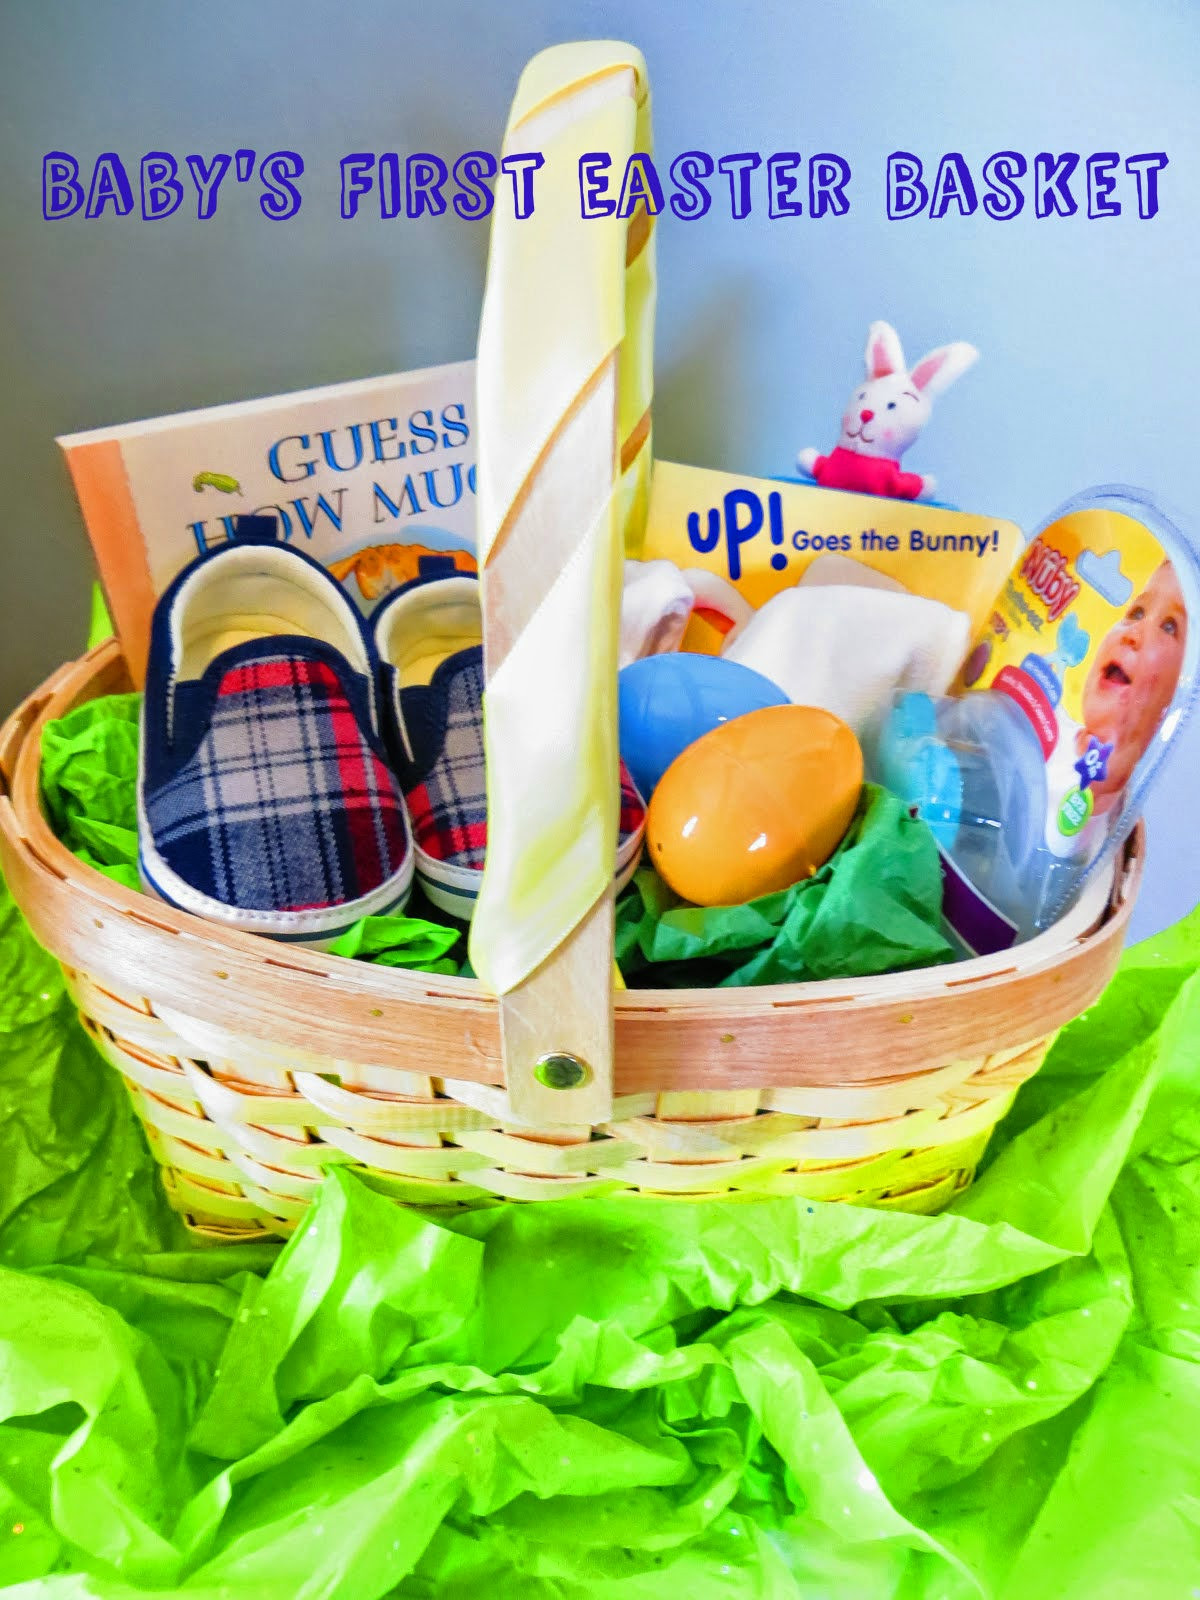 Baby First Easter Basket Ideas
 Beautifully Candid Baby s First Easter Basket